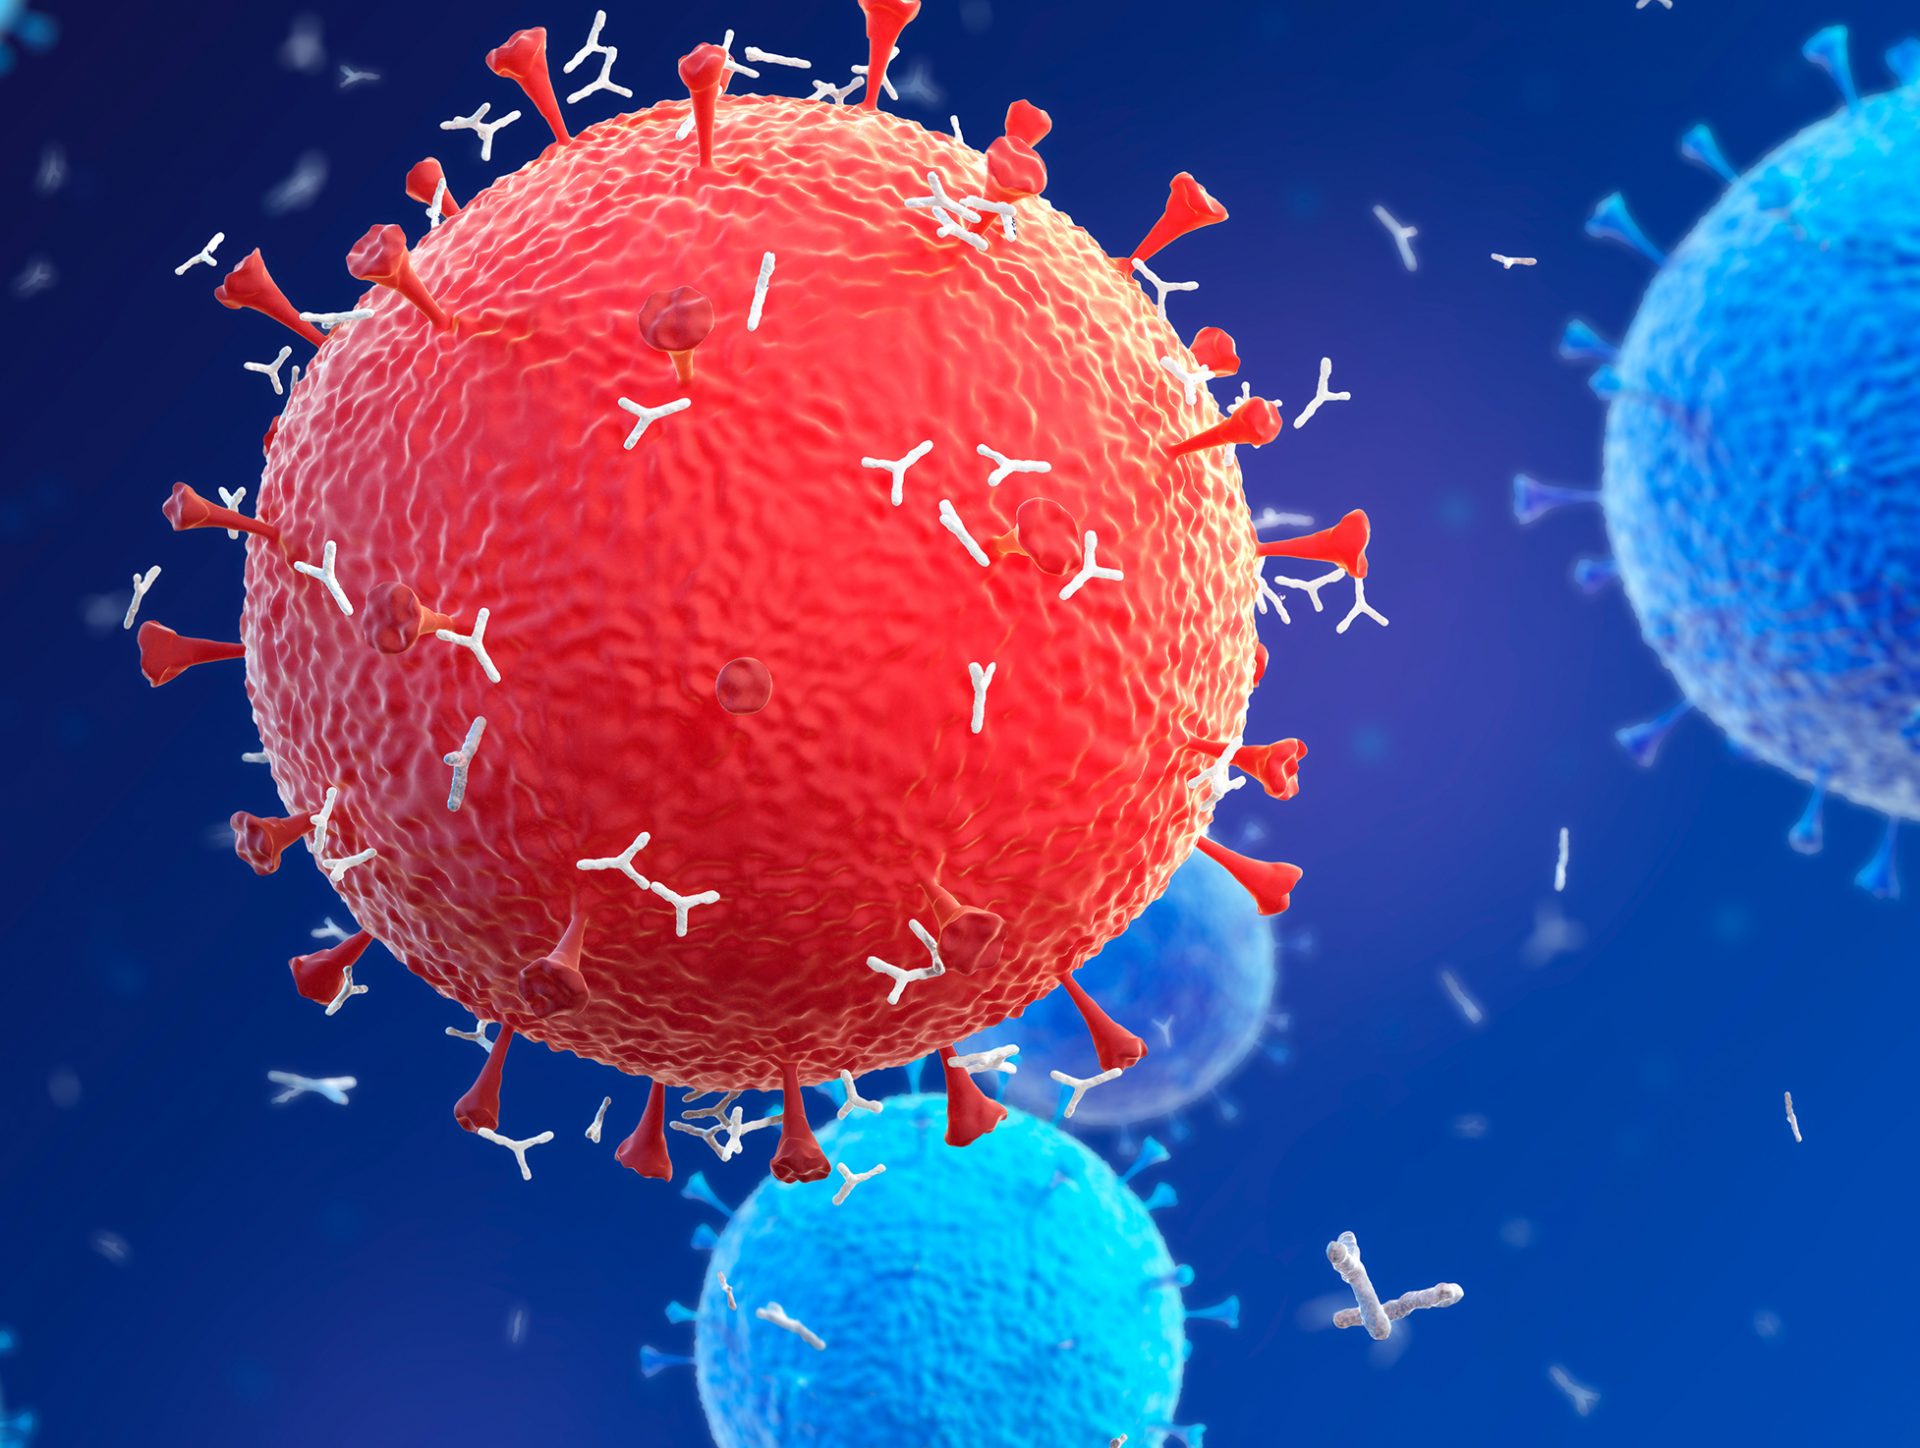 An illustration shows spiky antigens studding the virus's outer coat. Tests under development that look for these antigens might be faster than PCR tests for diagnosing COVID-19, proponents say. But the tests might still need PCR-test confirmation.